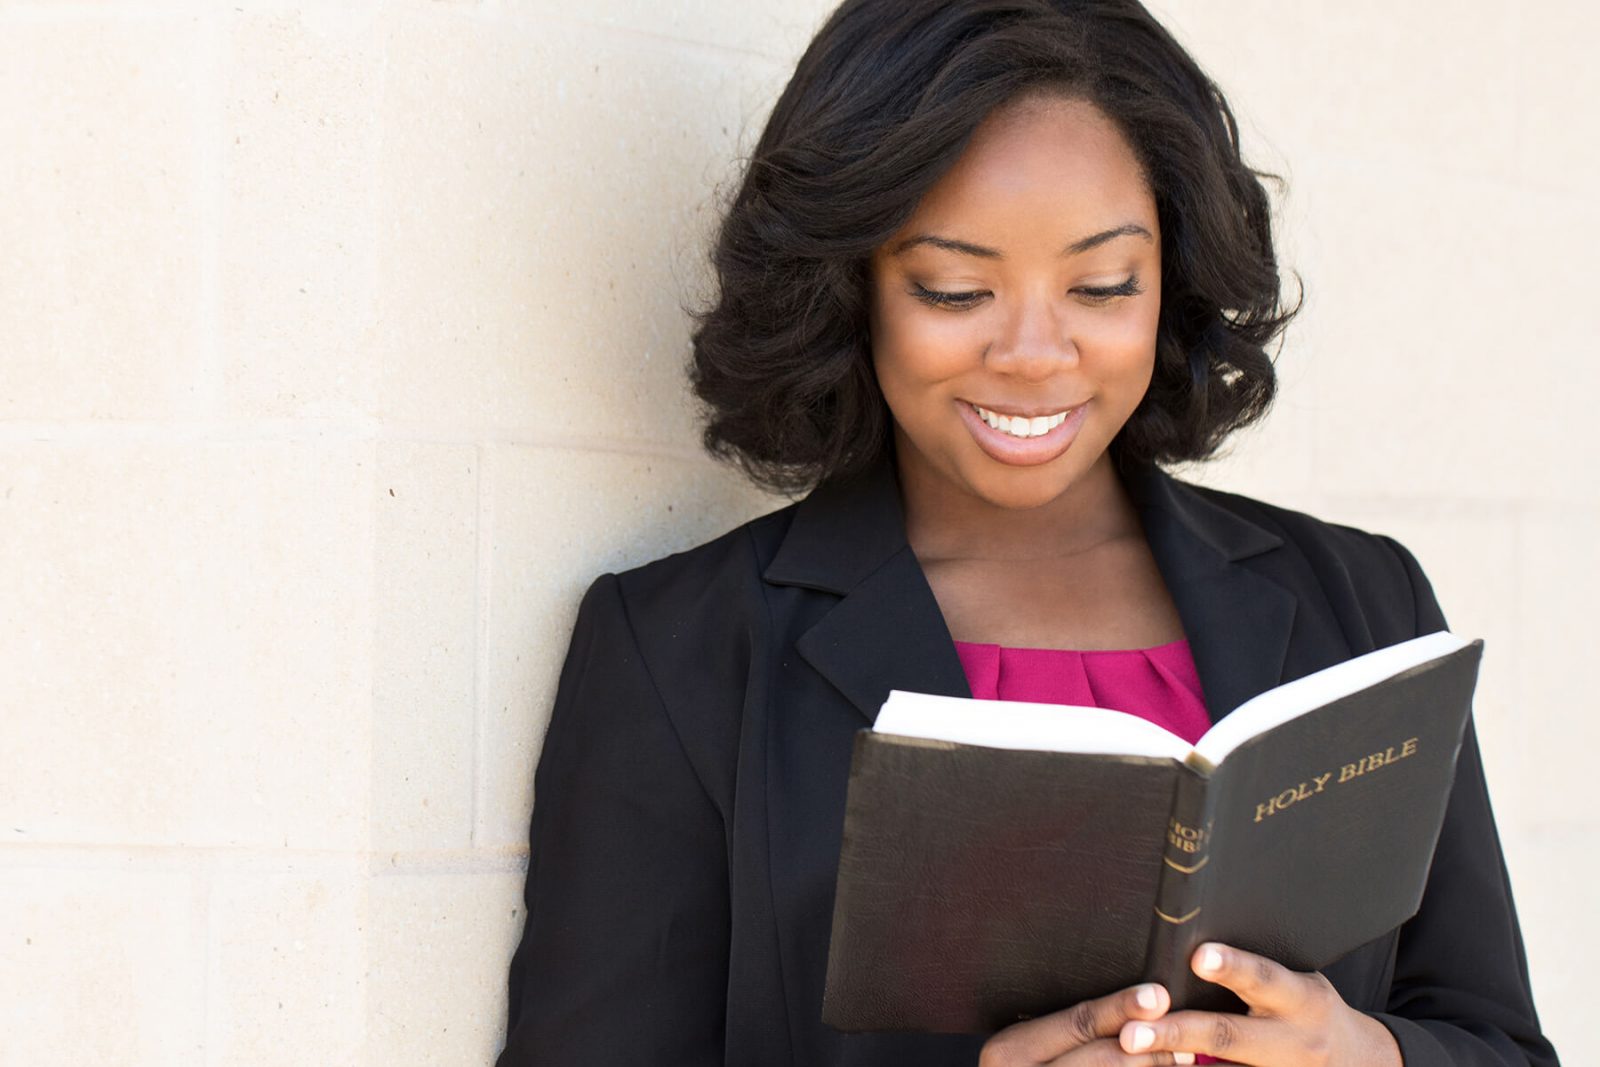 Smiling woman reading the bible